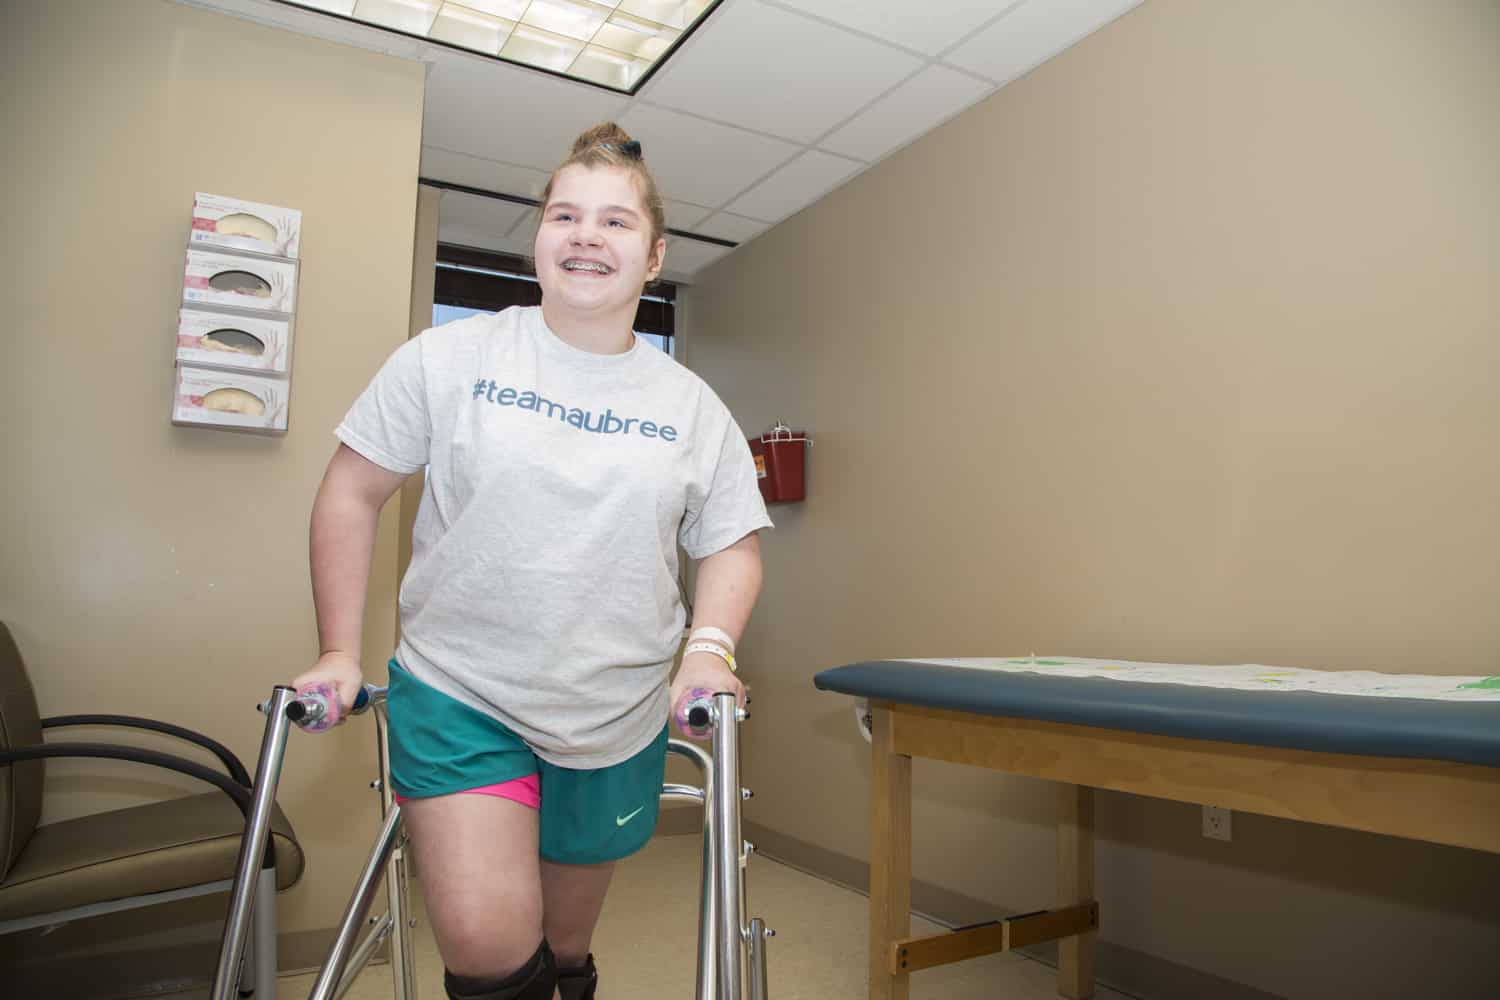 Teen diagnosed with cerebral palsy is beating conventional odds.